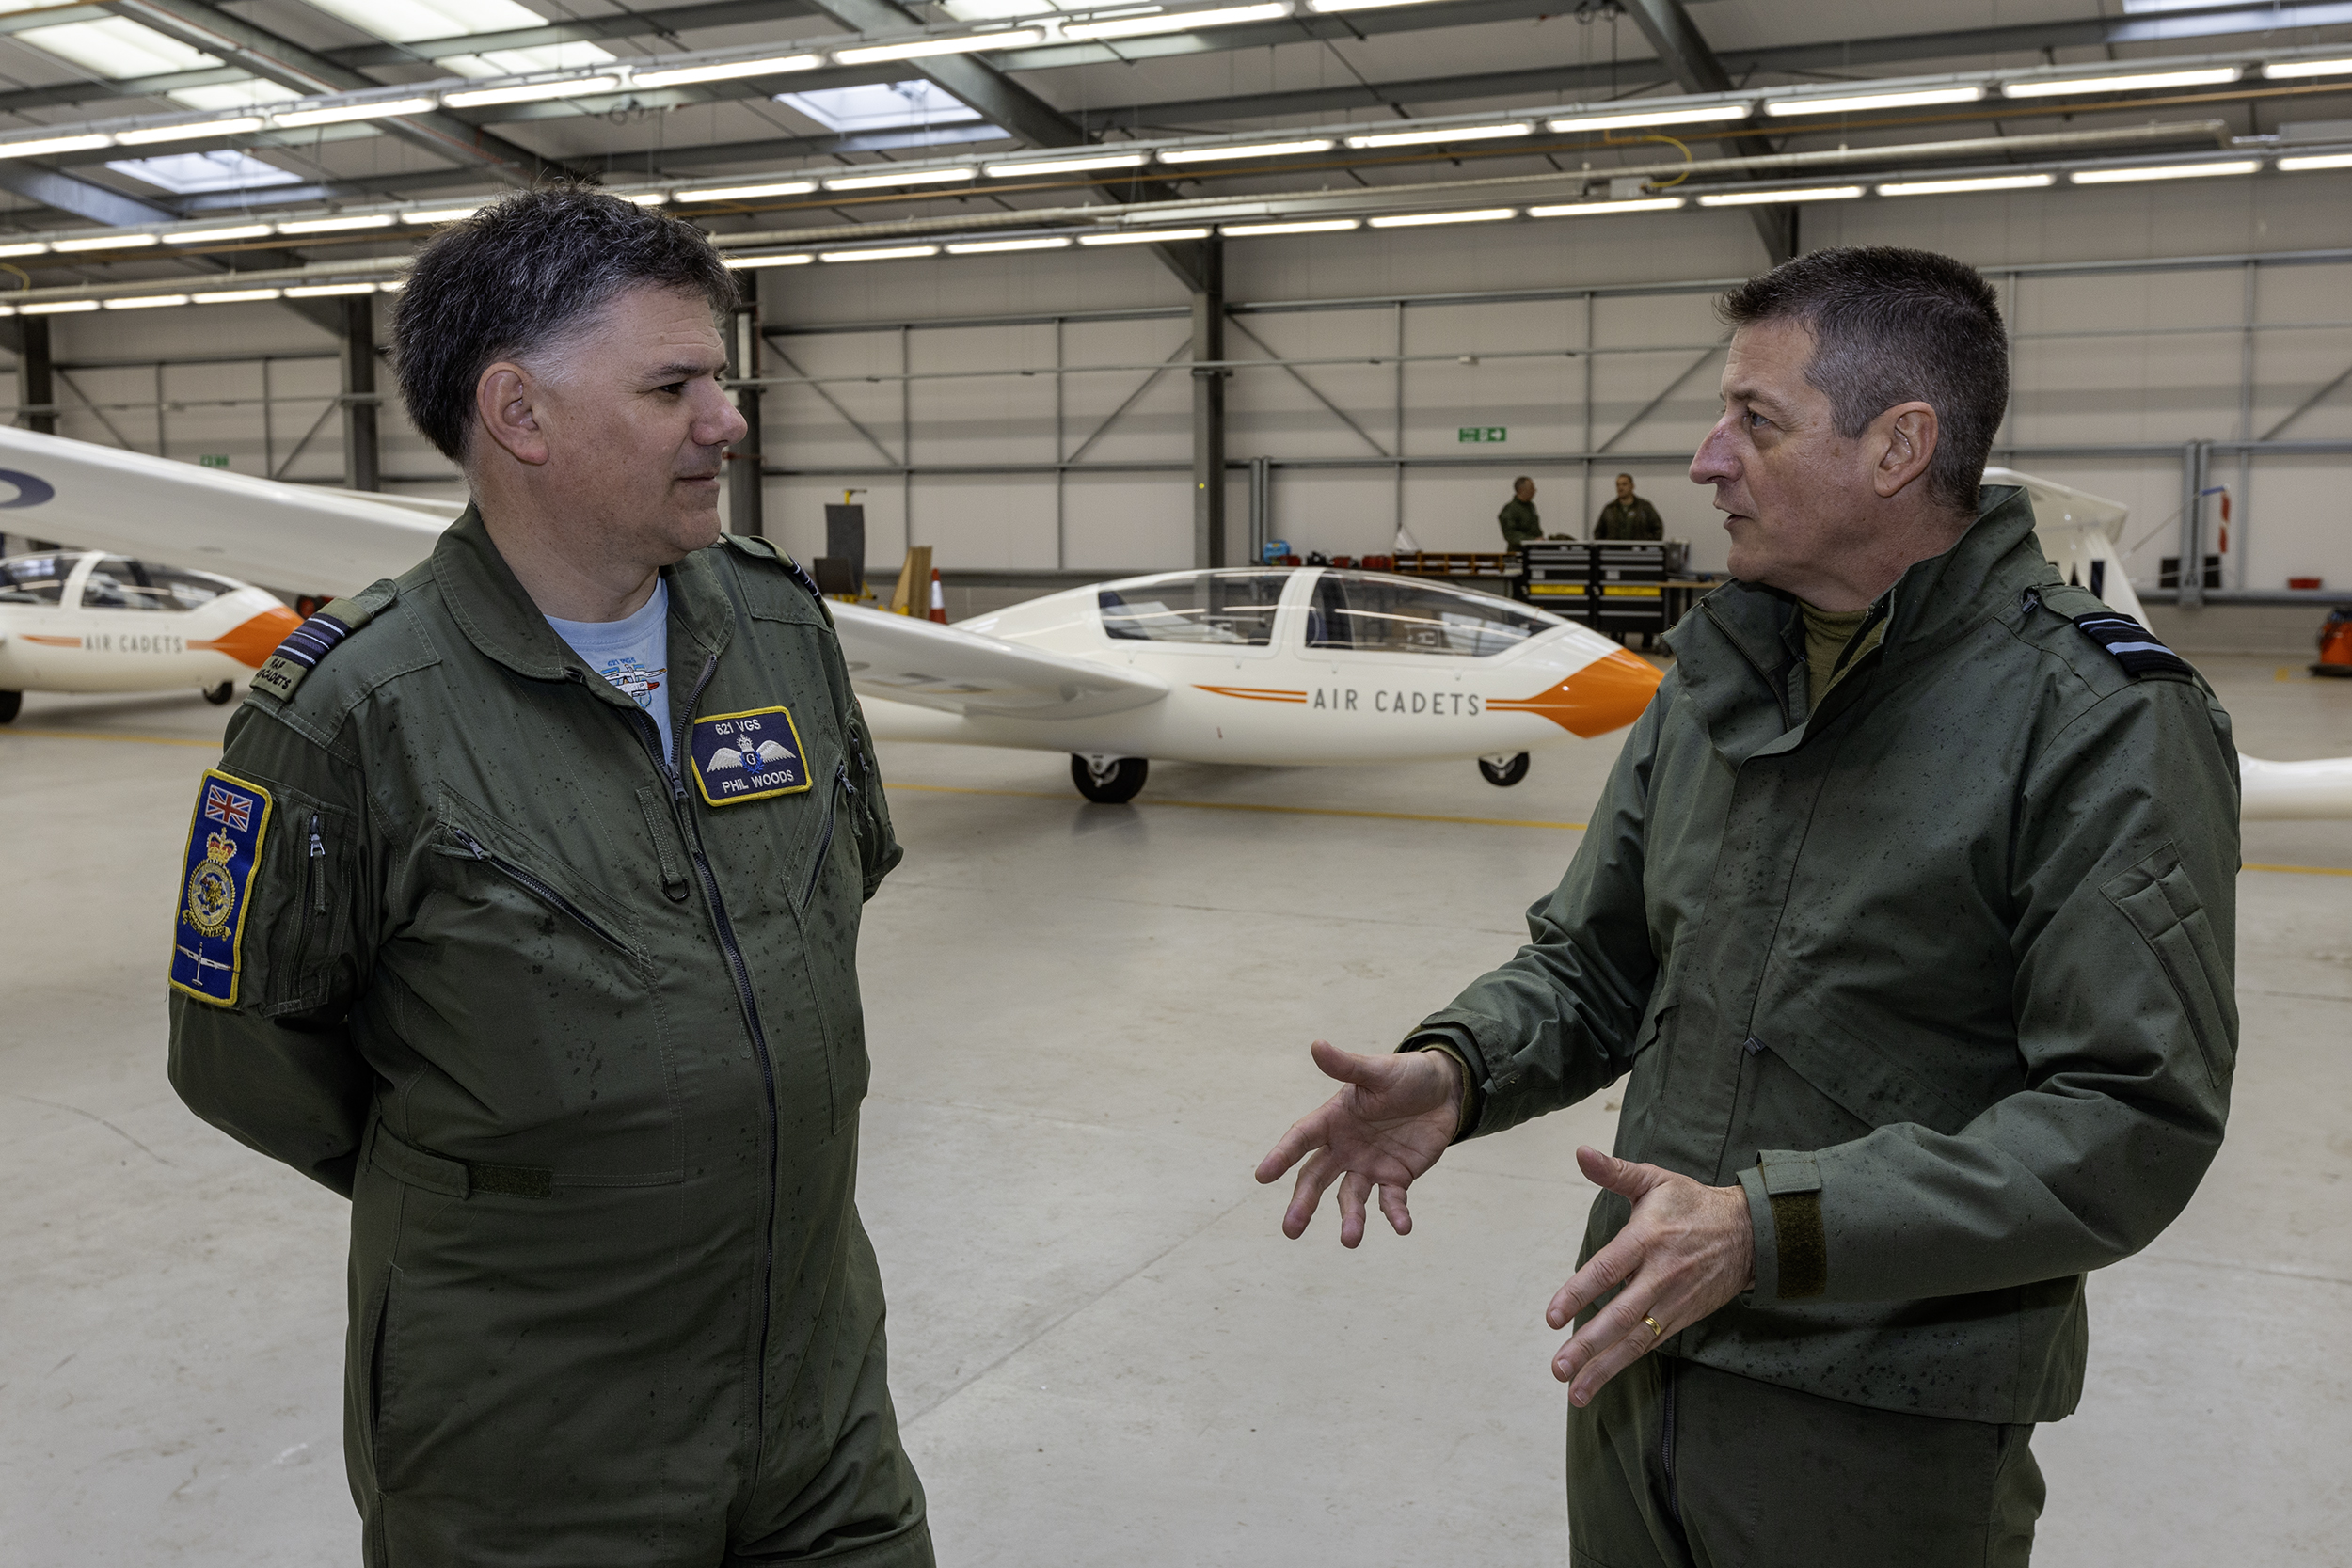 Sqn Ldr Woods, OC of 621 VGS in the hangar with AVM Townsend